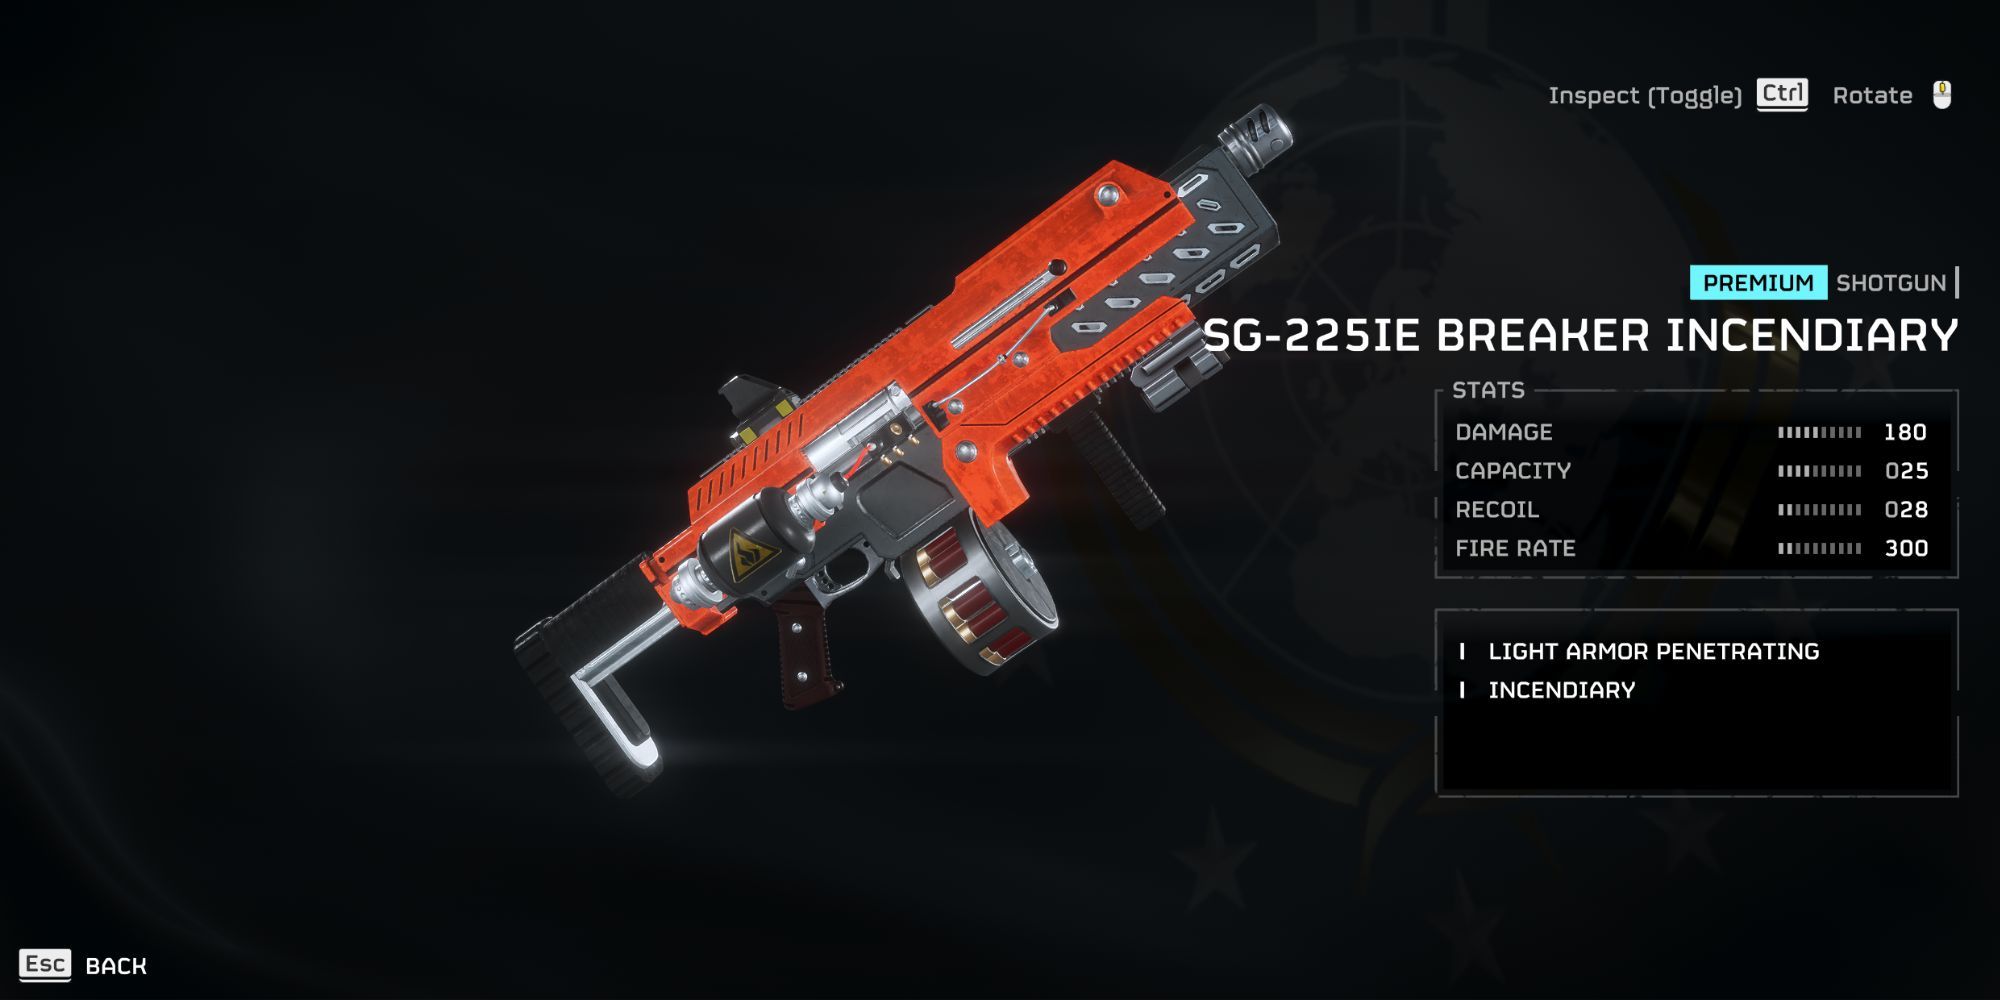 A screenshot of the details page for the SG-225IE Breaker Incendiary